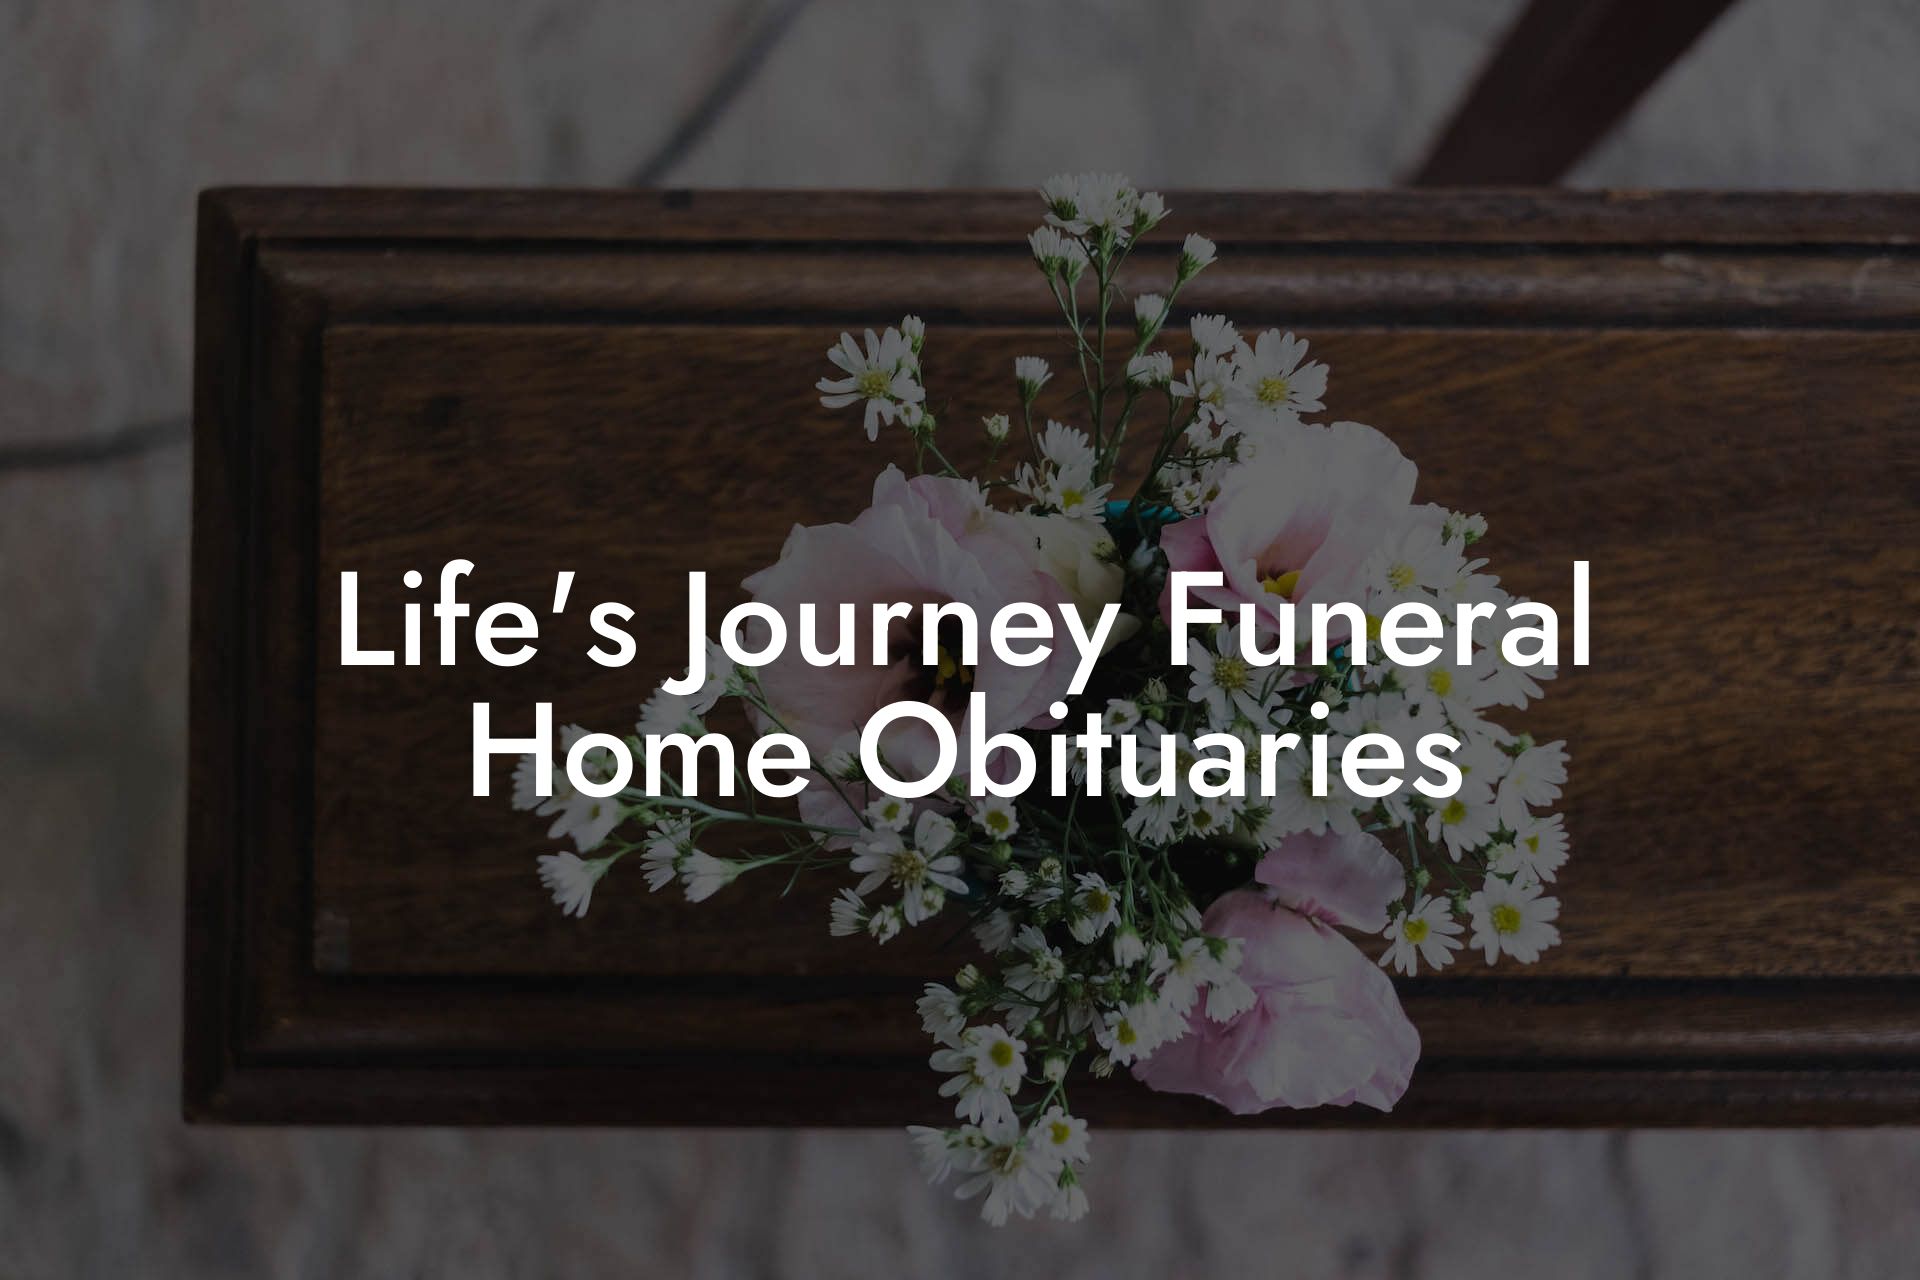 Life's Journey Funeral Home Obituaries